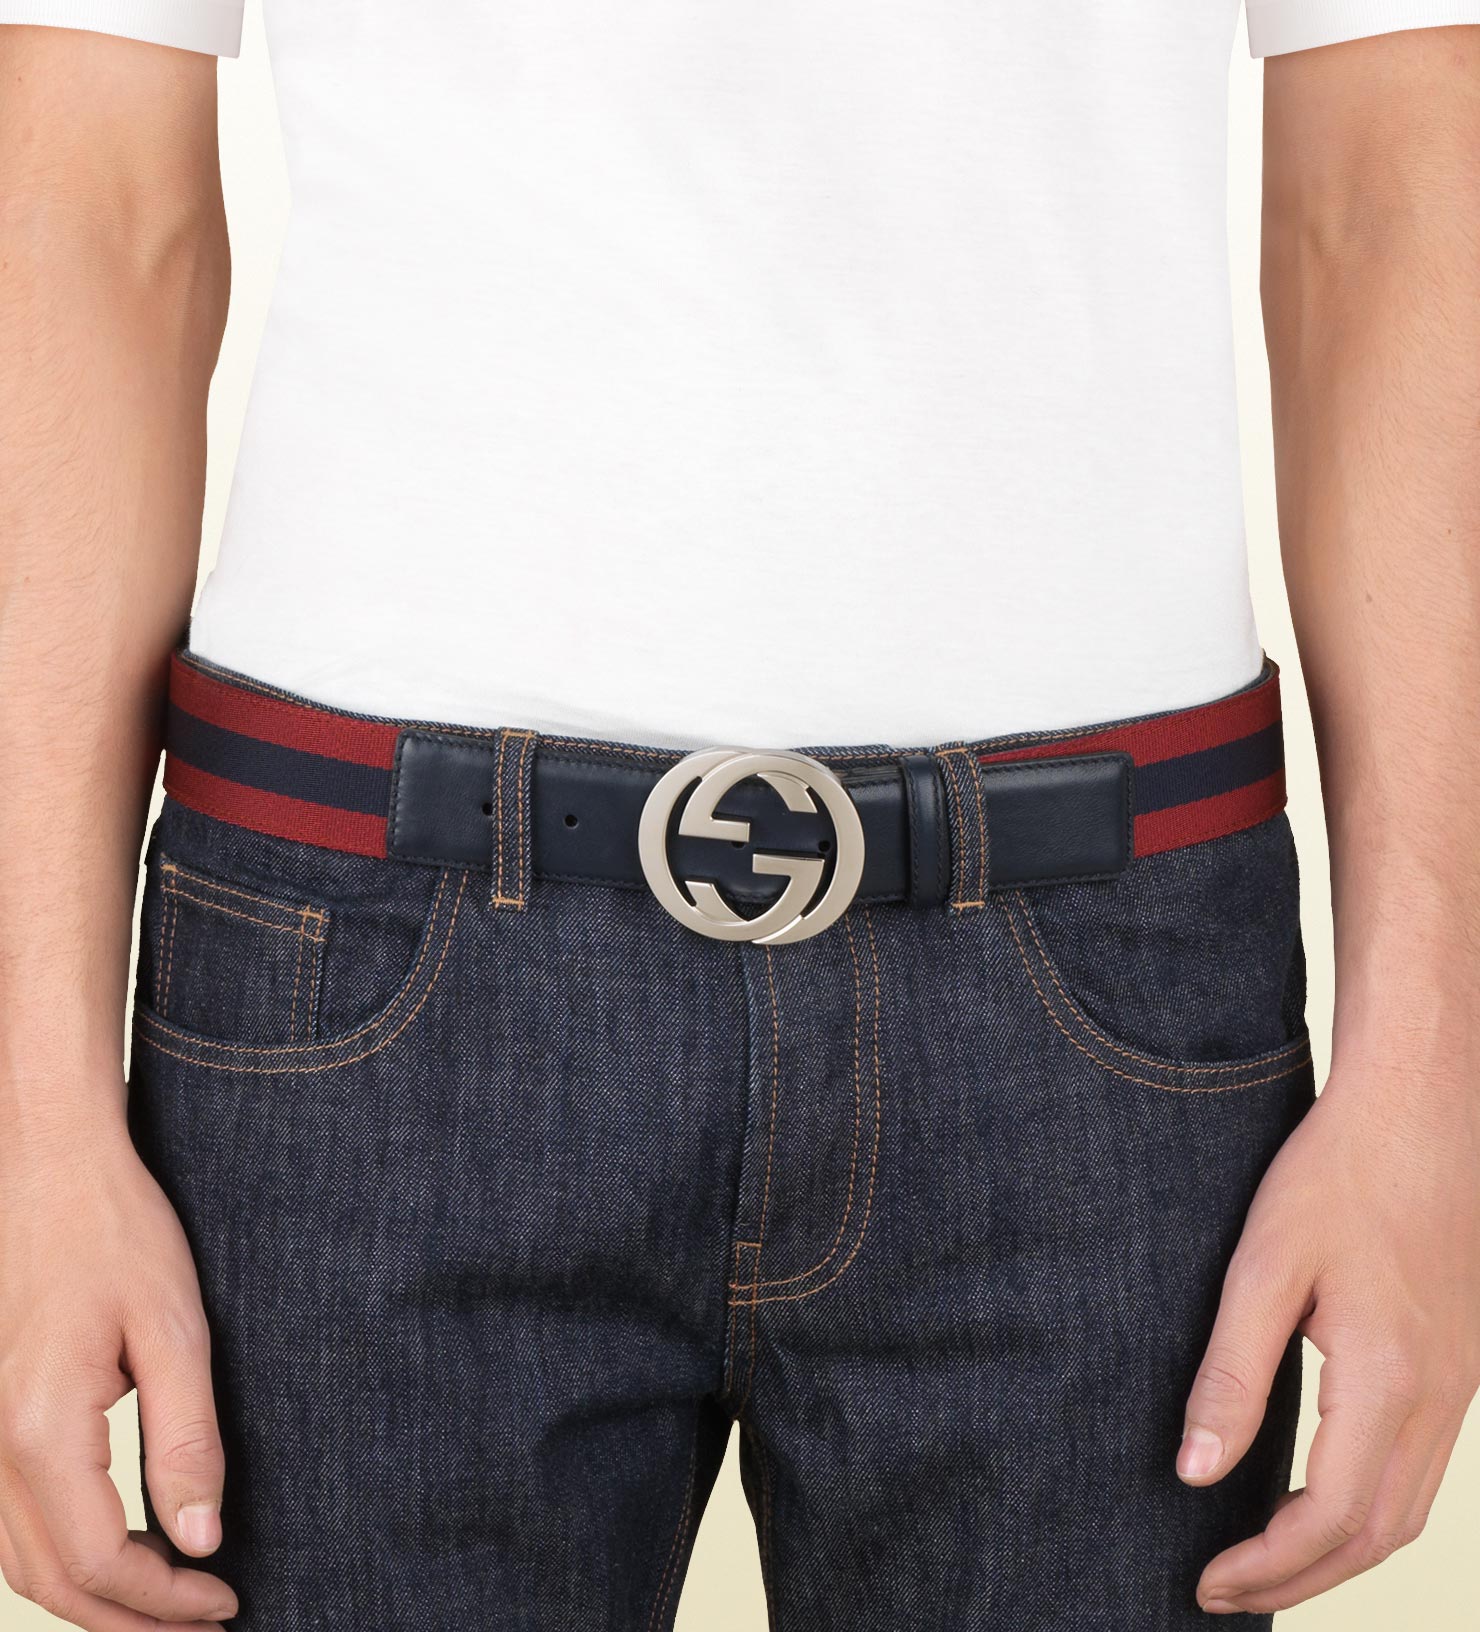 web belt with g buckle